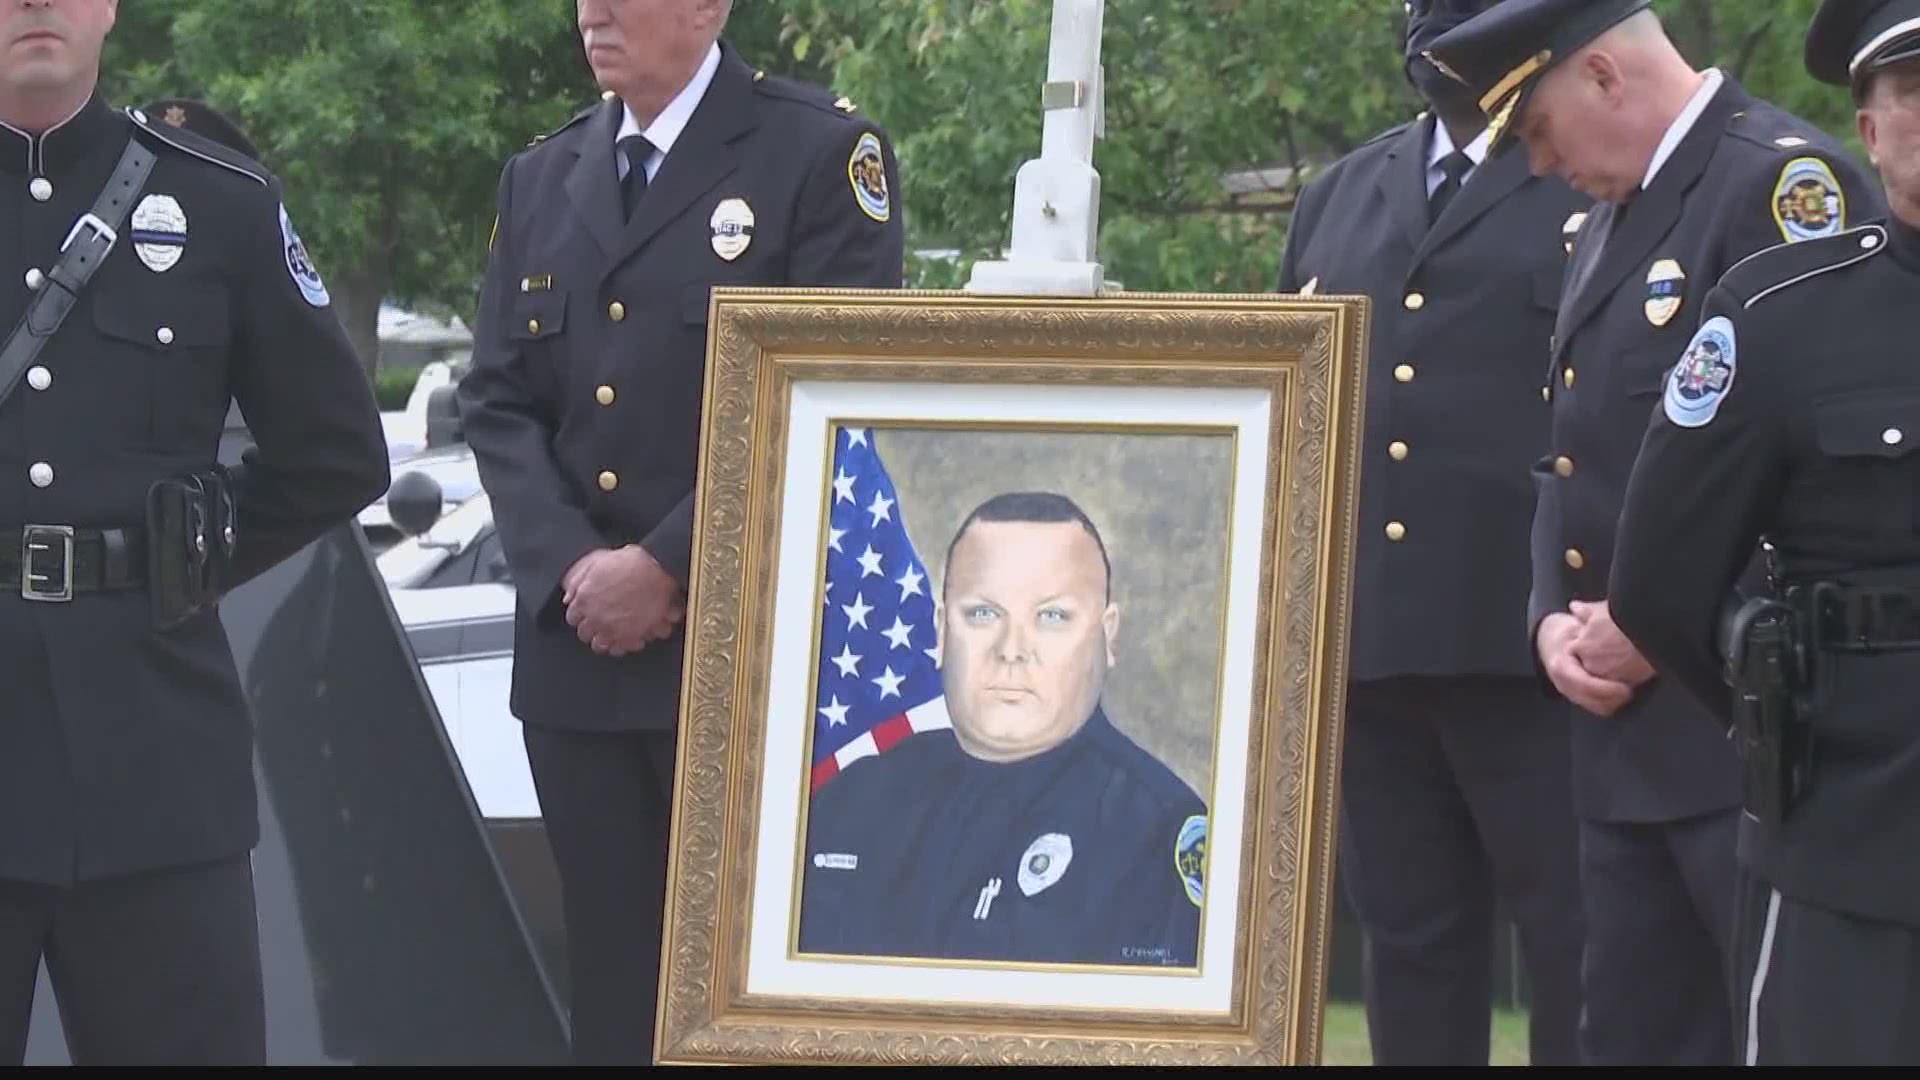 Local law enforcement and family came together for the reveal of fallen officer Billy Clardy III's commemorative brick at the Huntsville PD memorial.